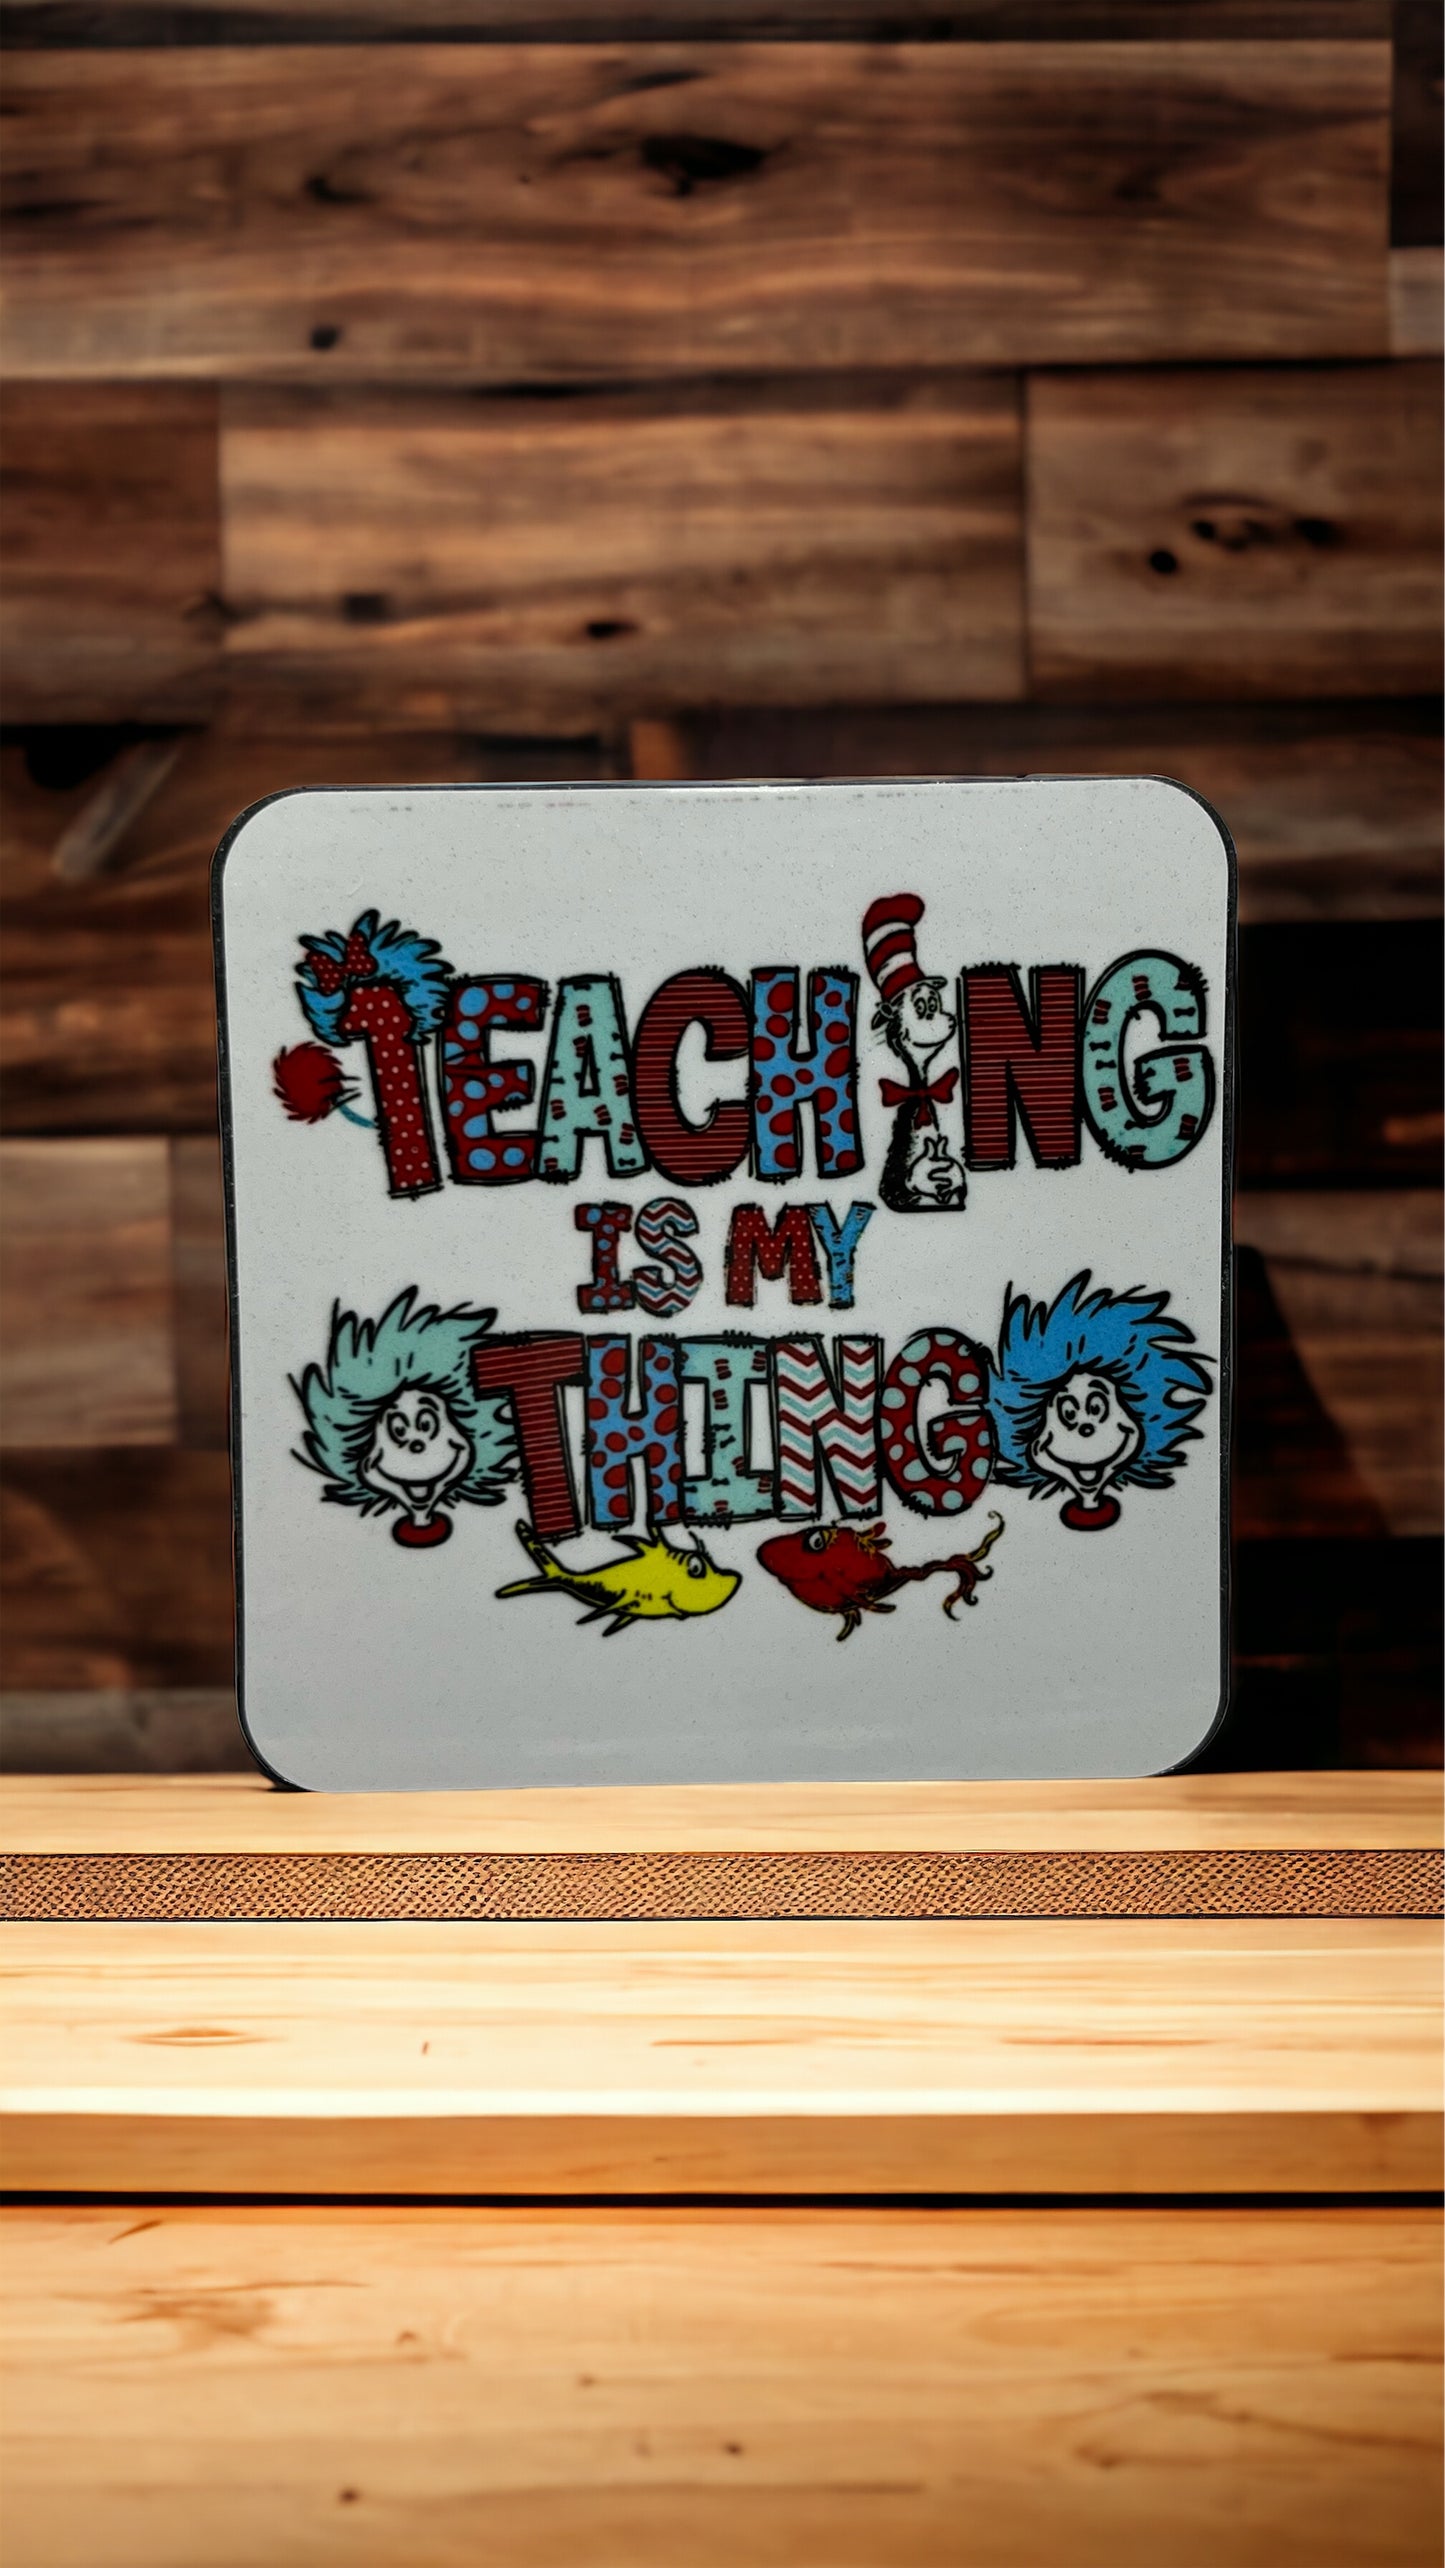 “Teaching is My Thing” Magnet